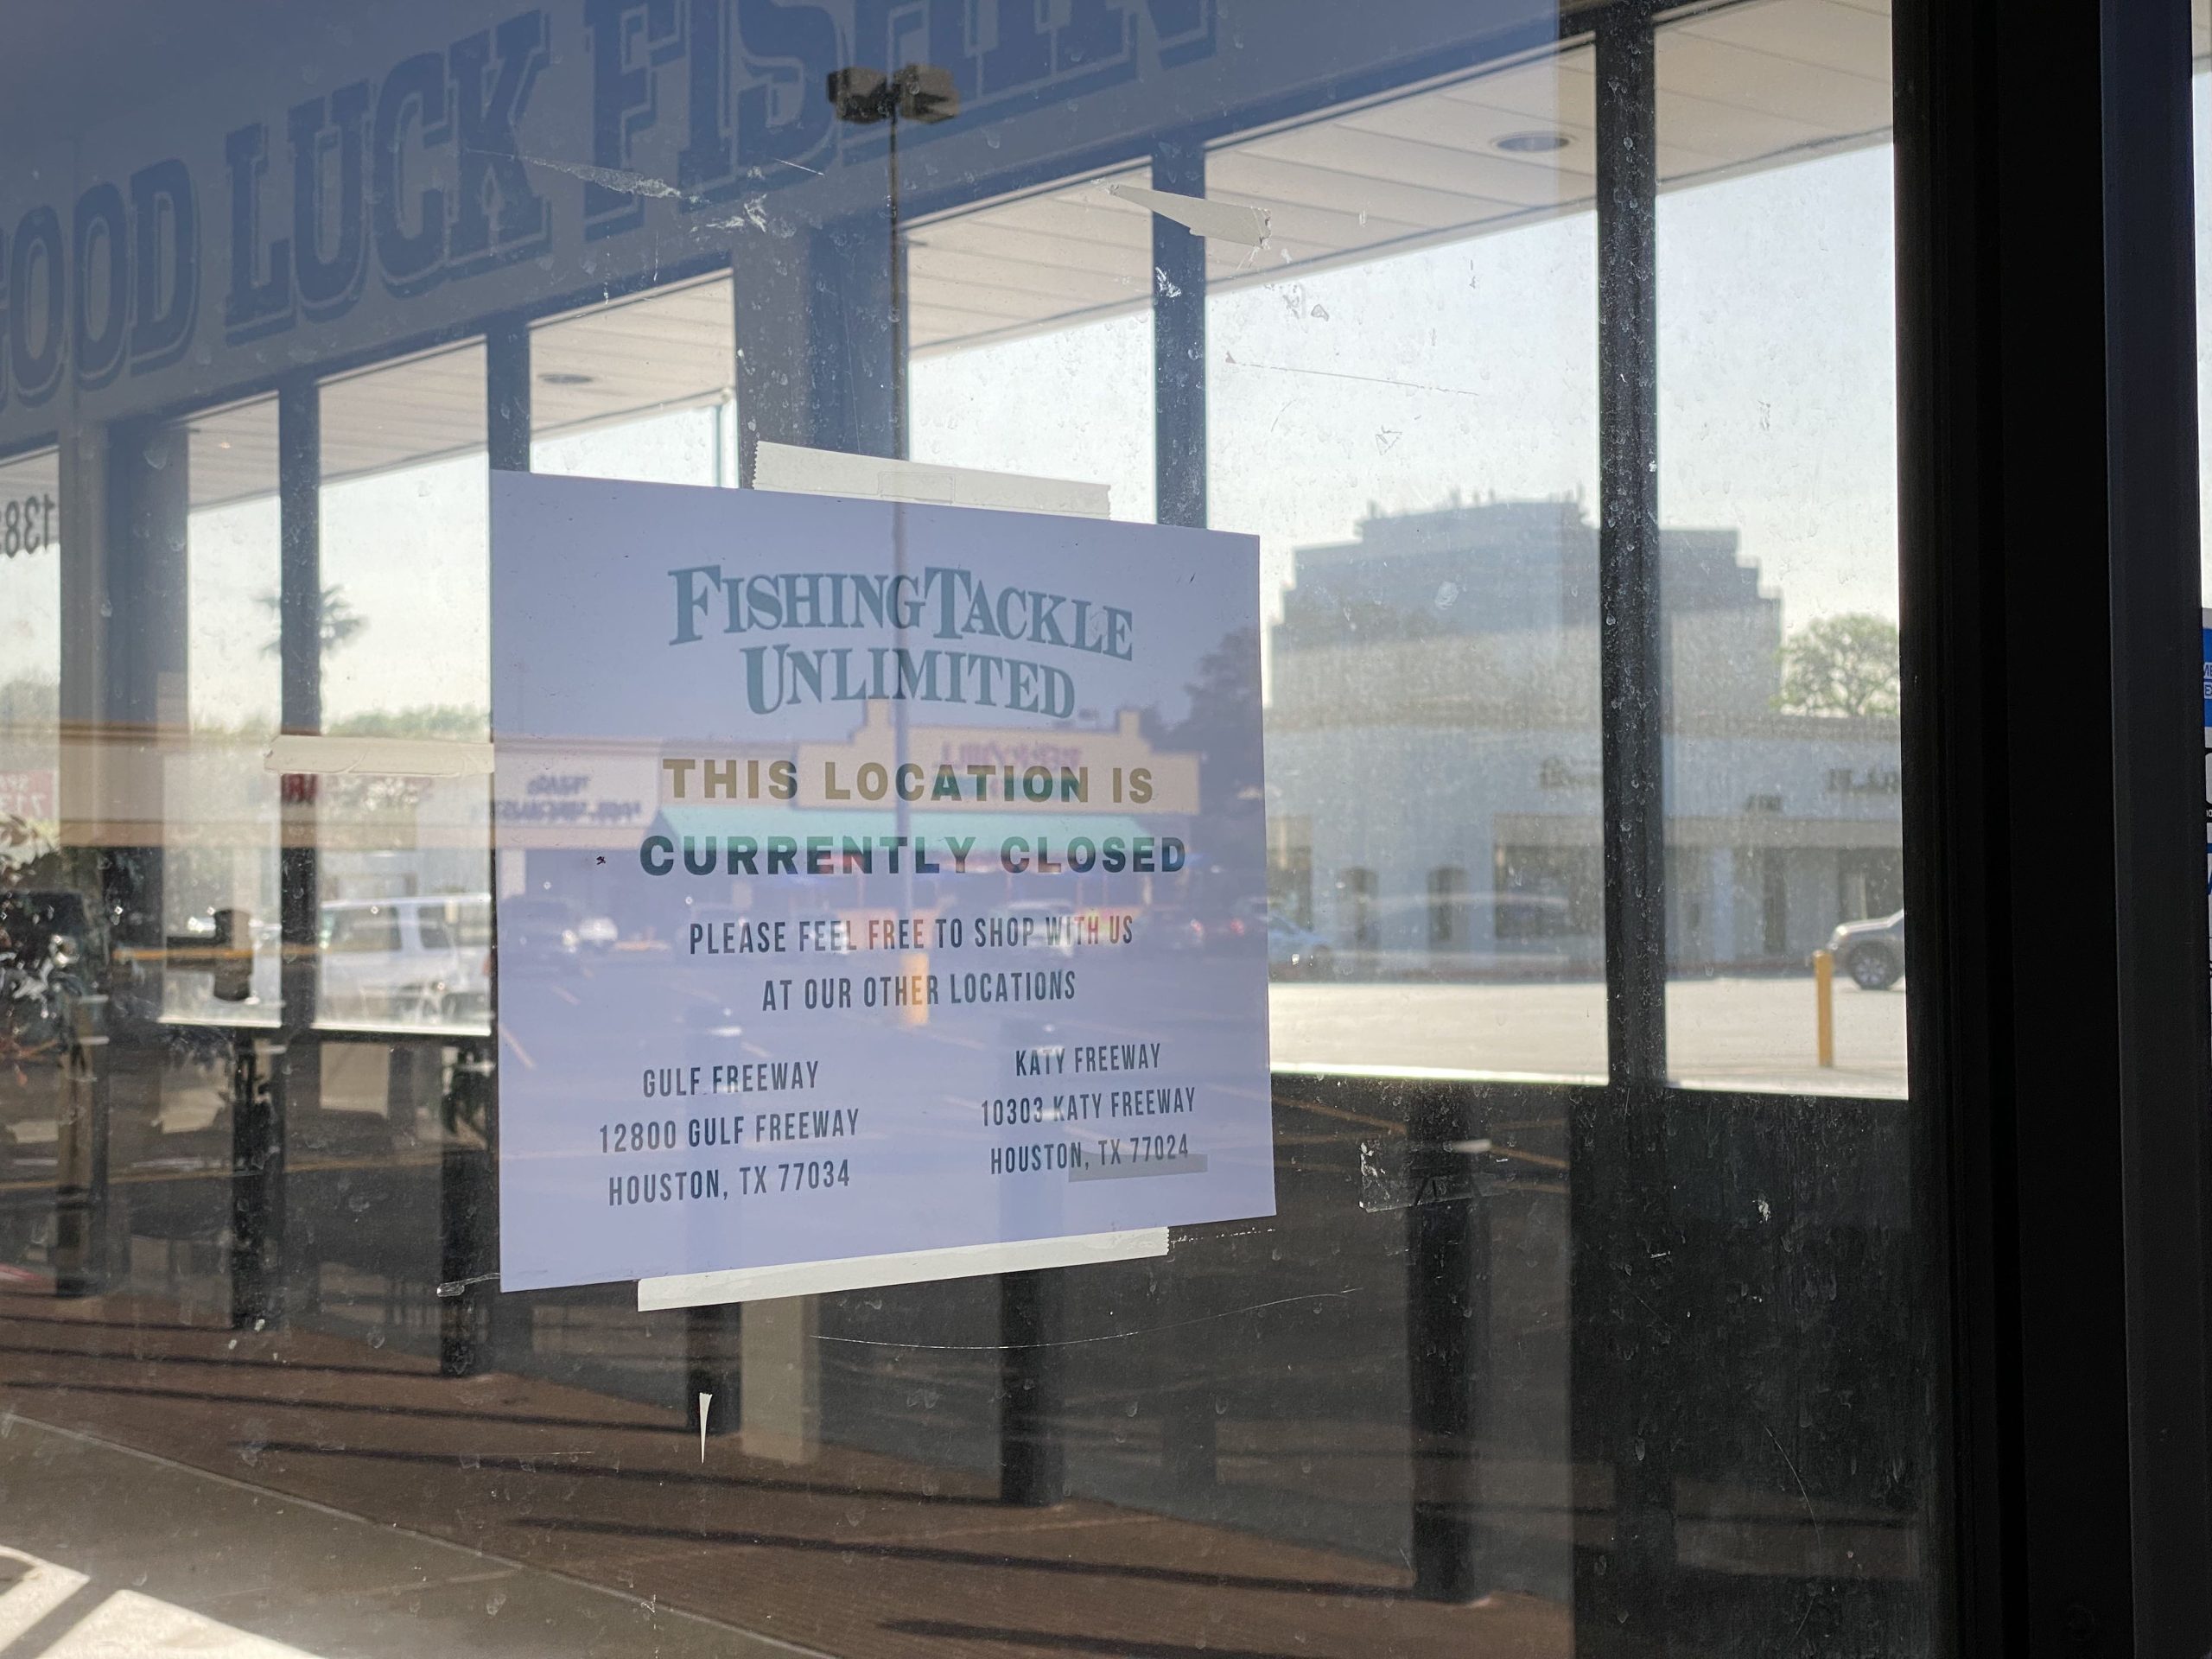 Fishing Tackle Unlimited closing means the end for this historic